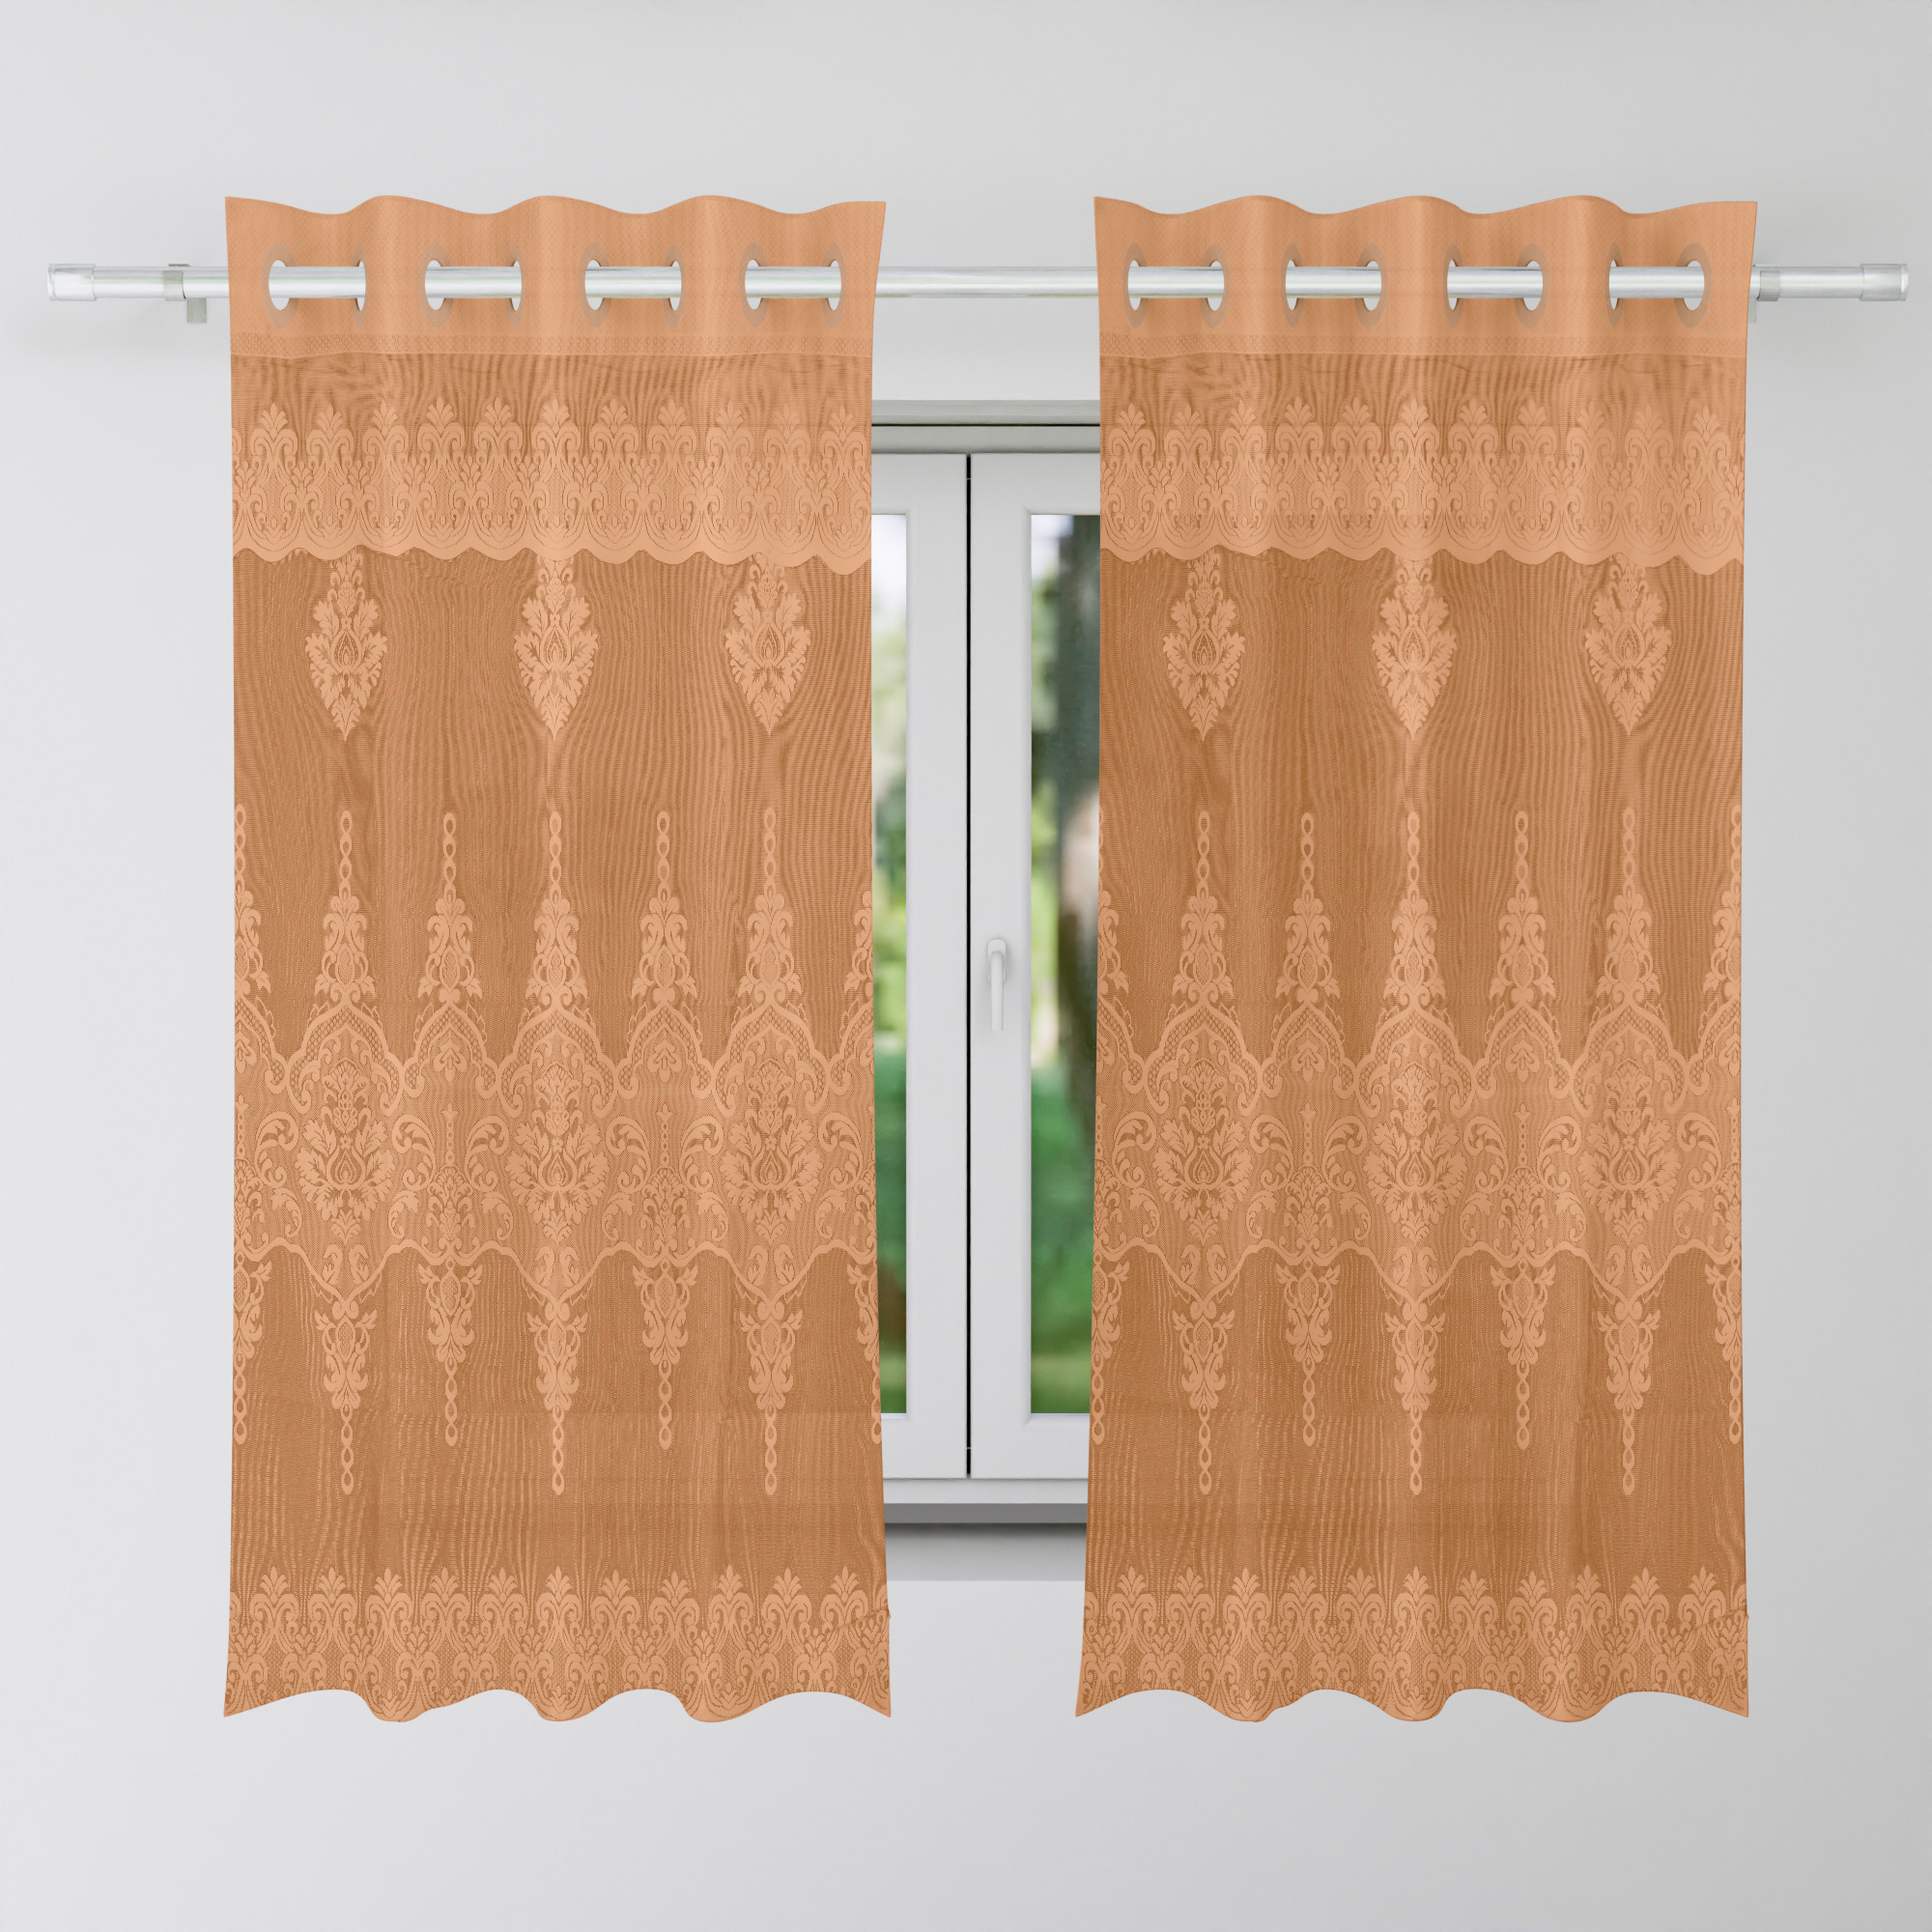 Kuber Industries Window Curtain | Darkening Window Curtains | Sheer Curtain with 8 Rings | Parda for Living Room | Drapes for Bedroom | Net Frill Window Curtain | 5 Ft | SY15ZZ | Golden